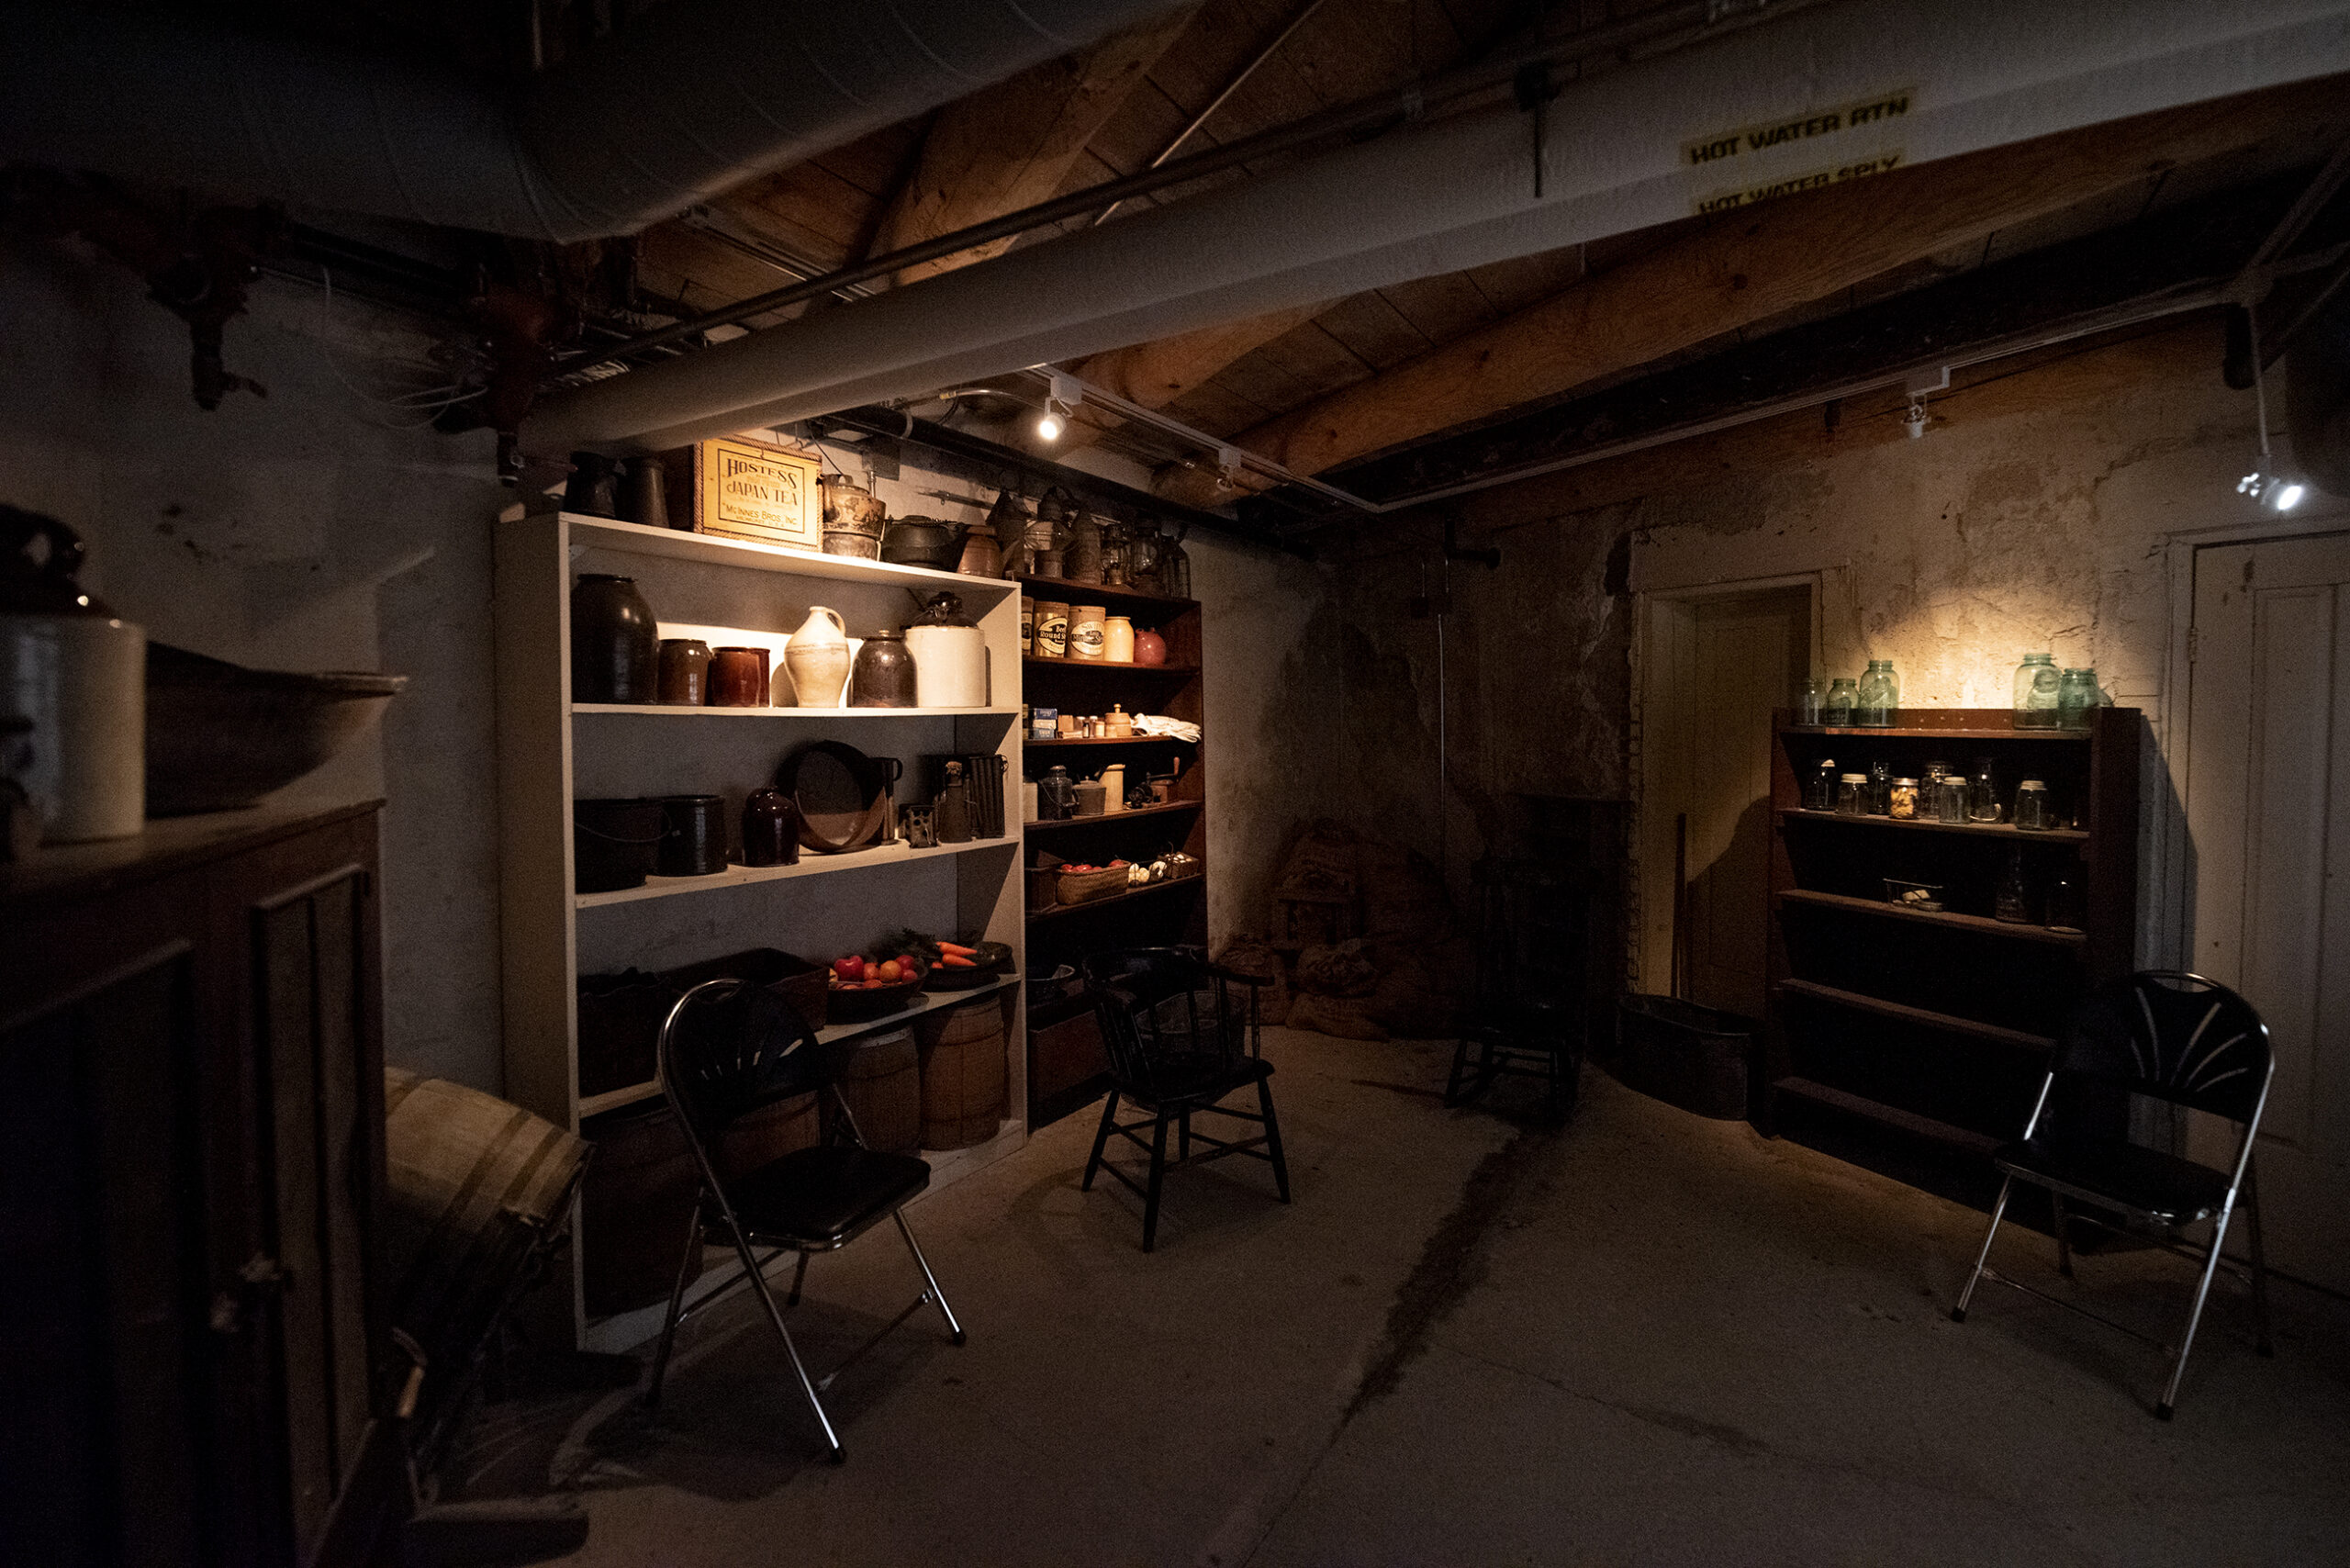 A dark room with items on shelves.